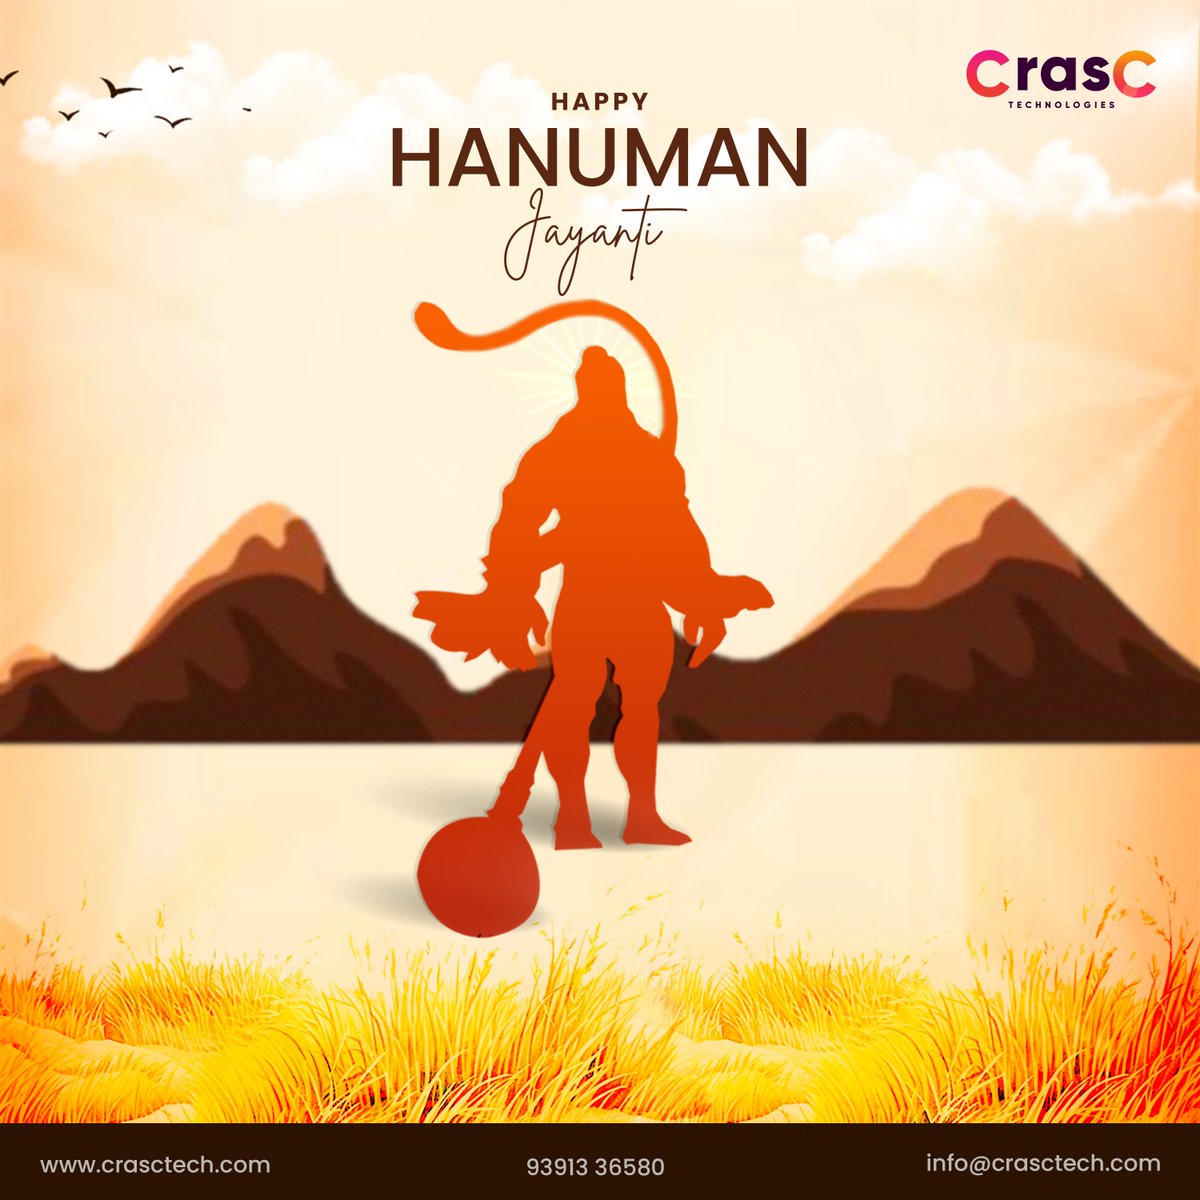 🚩 Wishing you a blessed and joyous Hanuman Jayanti from all of us at Crasctech! 🐒 🙏 May the divine blessings of Lord Hanuman fill your life with strength, courage, and devotion. 🌟 #crasctech #socialmediamarketing #HanumanJayati #jaishreeram #indianfestival #Indianfestival